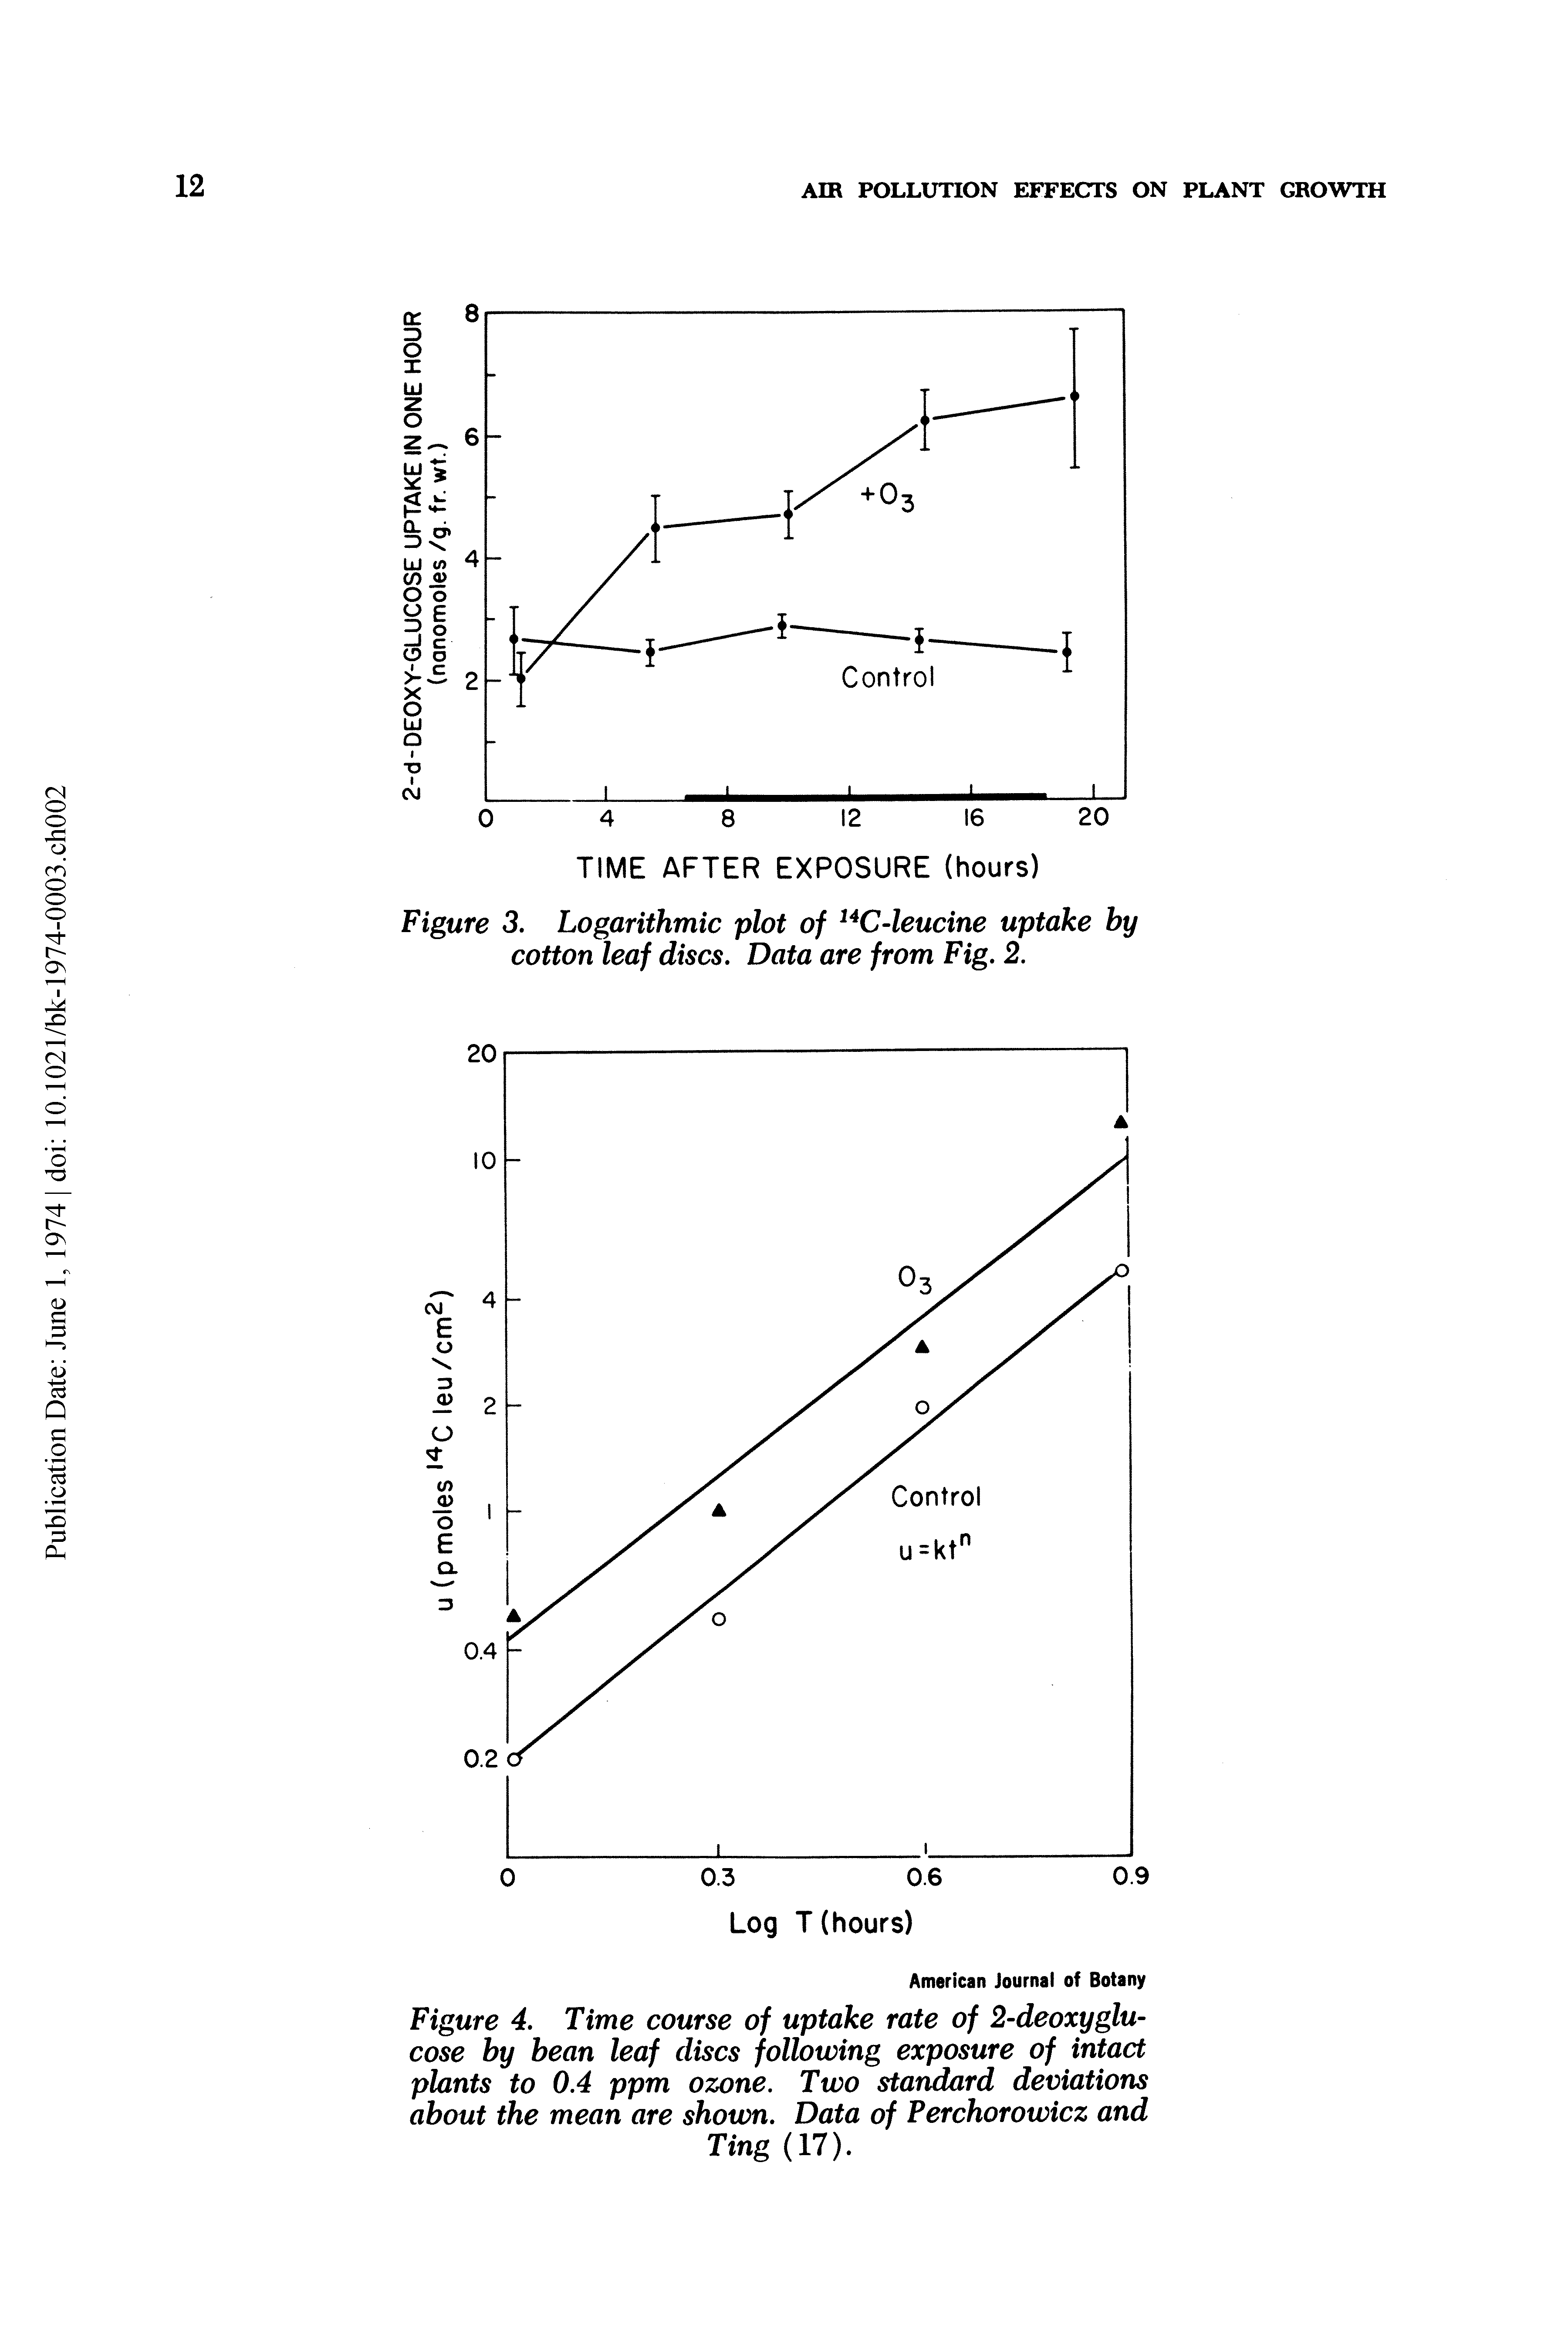 Figure 3. Logarithmic plot of C-leucine uptake by cotton leaf discs. Data are from Fig. 2.